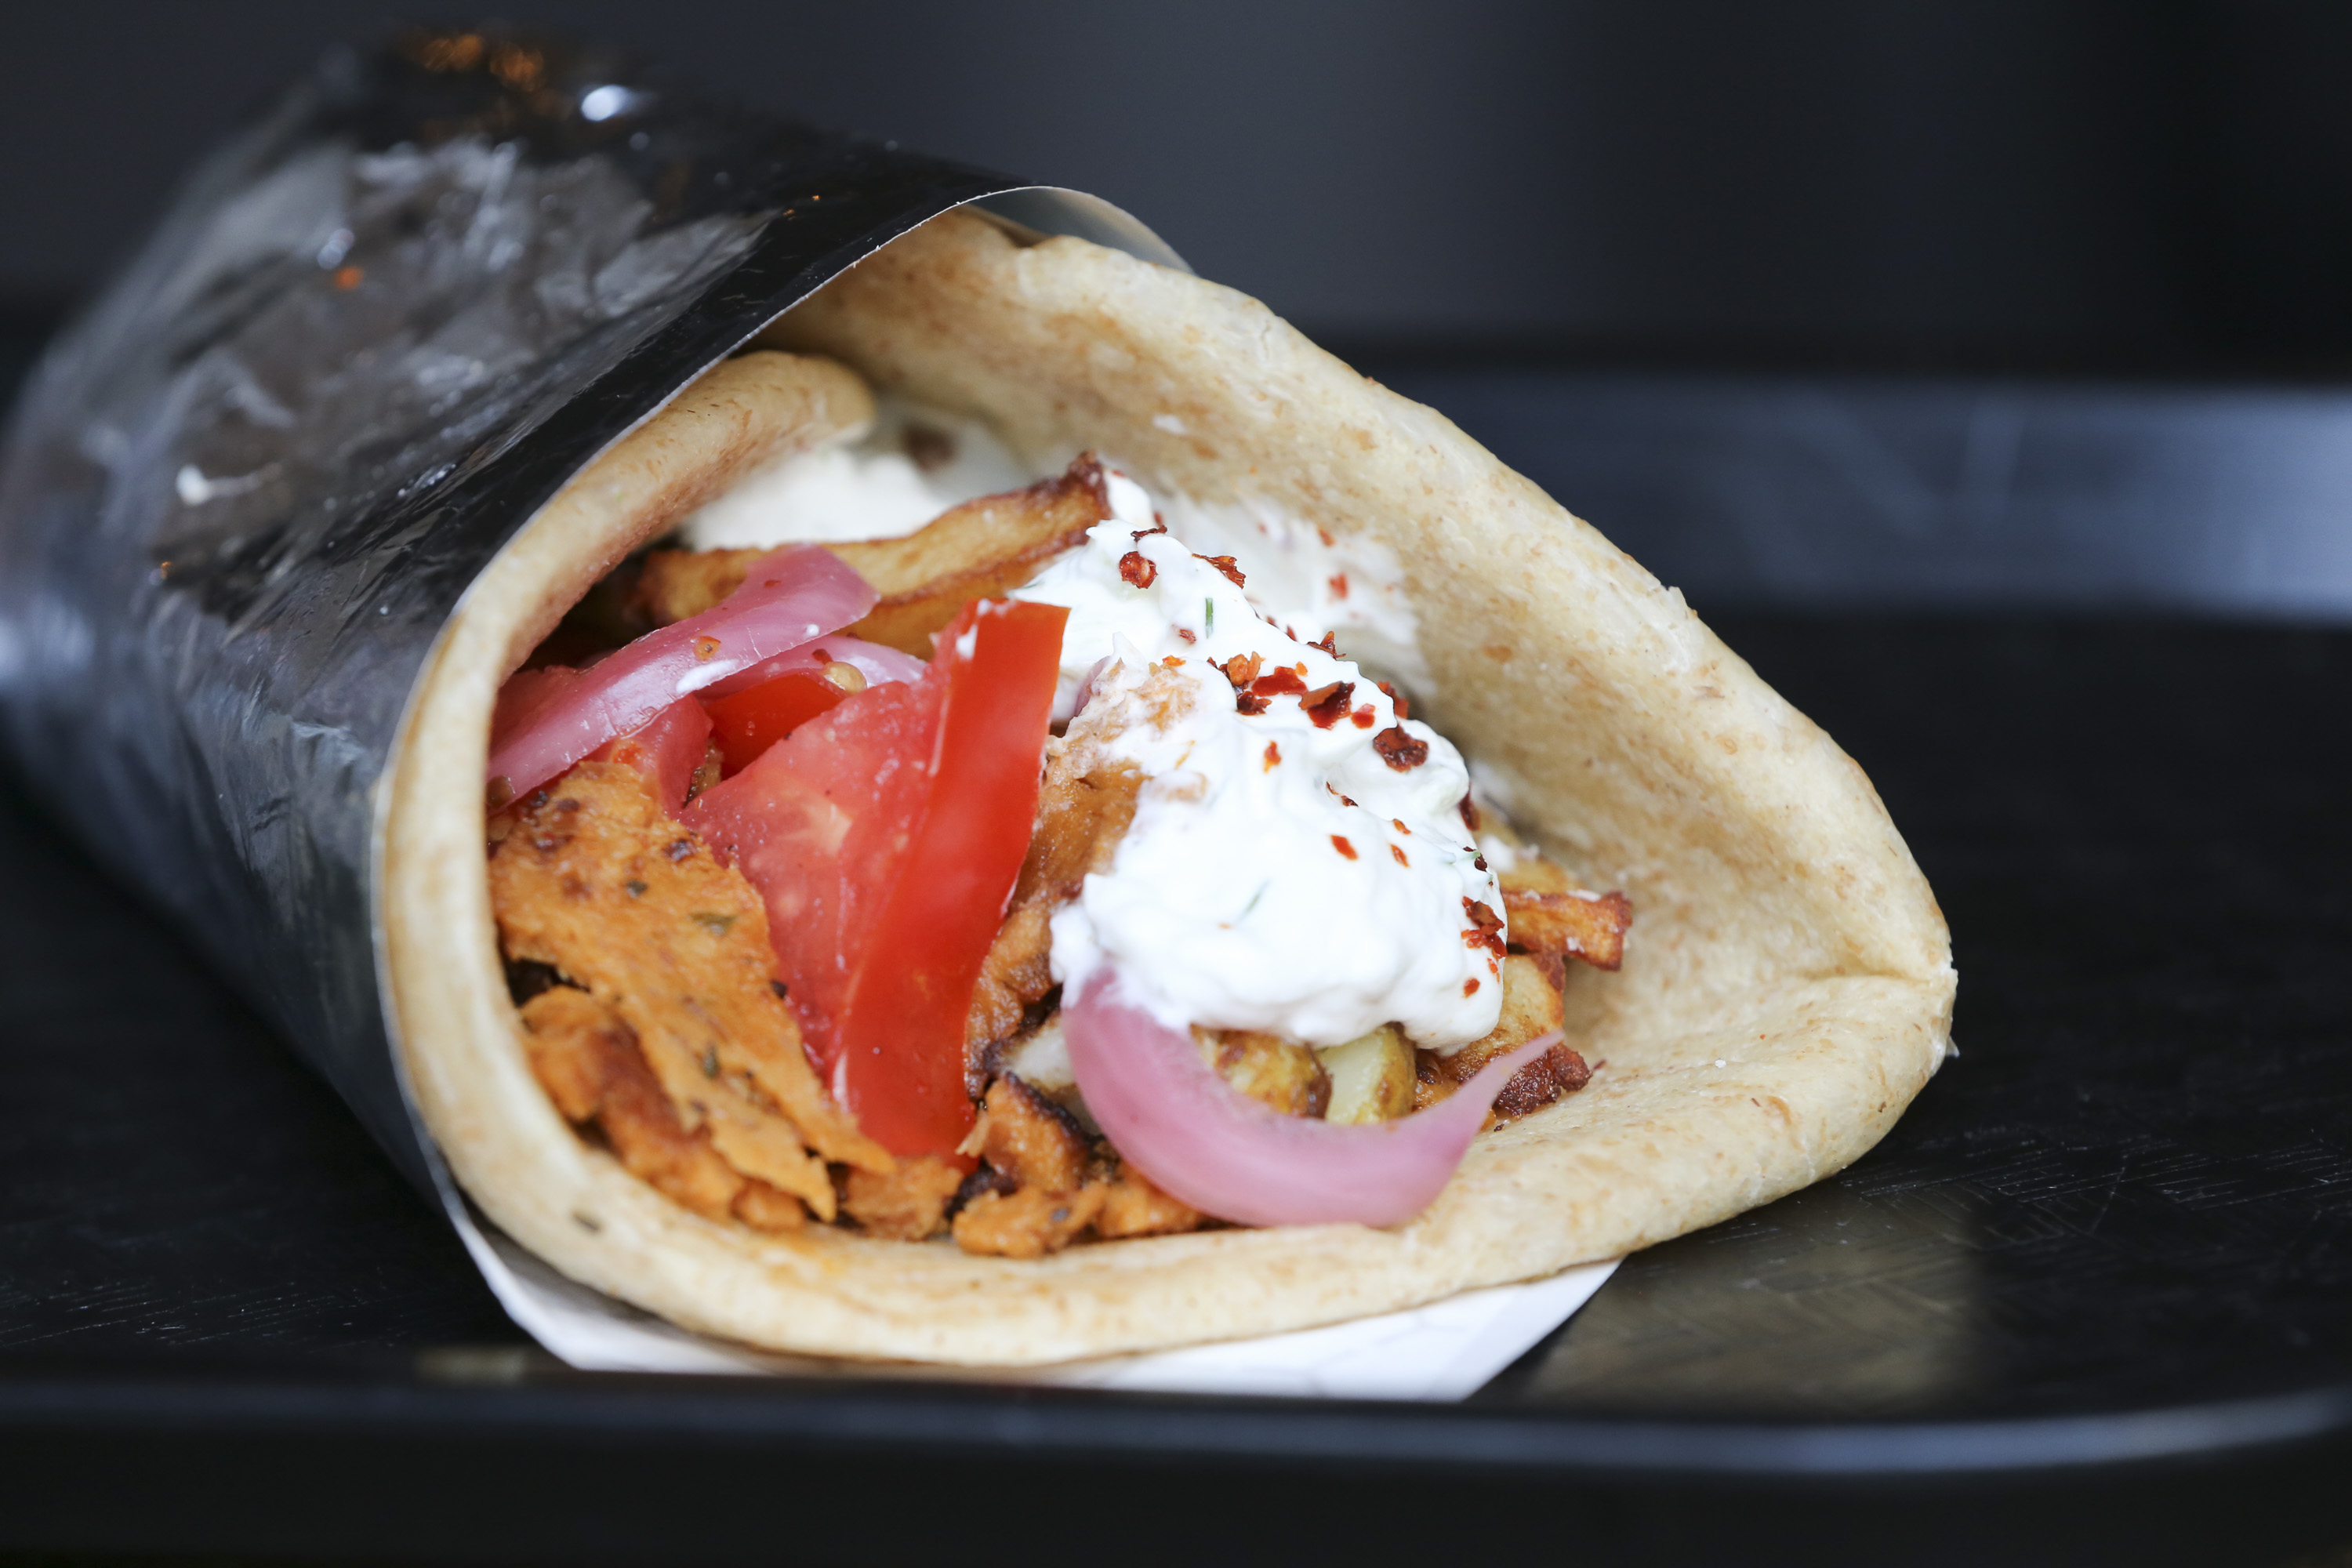 The gyro, made with seitan, pickled onion, almond tzaziki, tomato, and fried potato, is a signature item at Littleburg, a Greek-inspired, seasonal vegan kitchen for takeout in Union Square. 